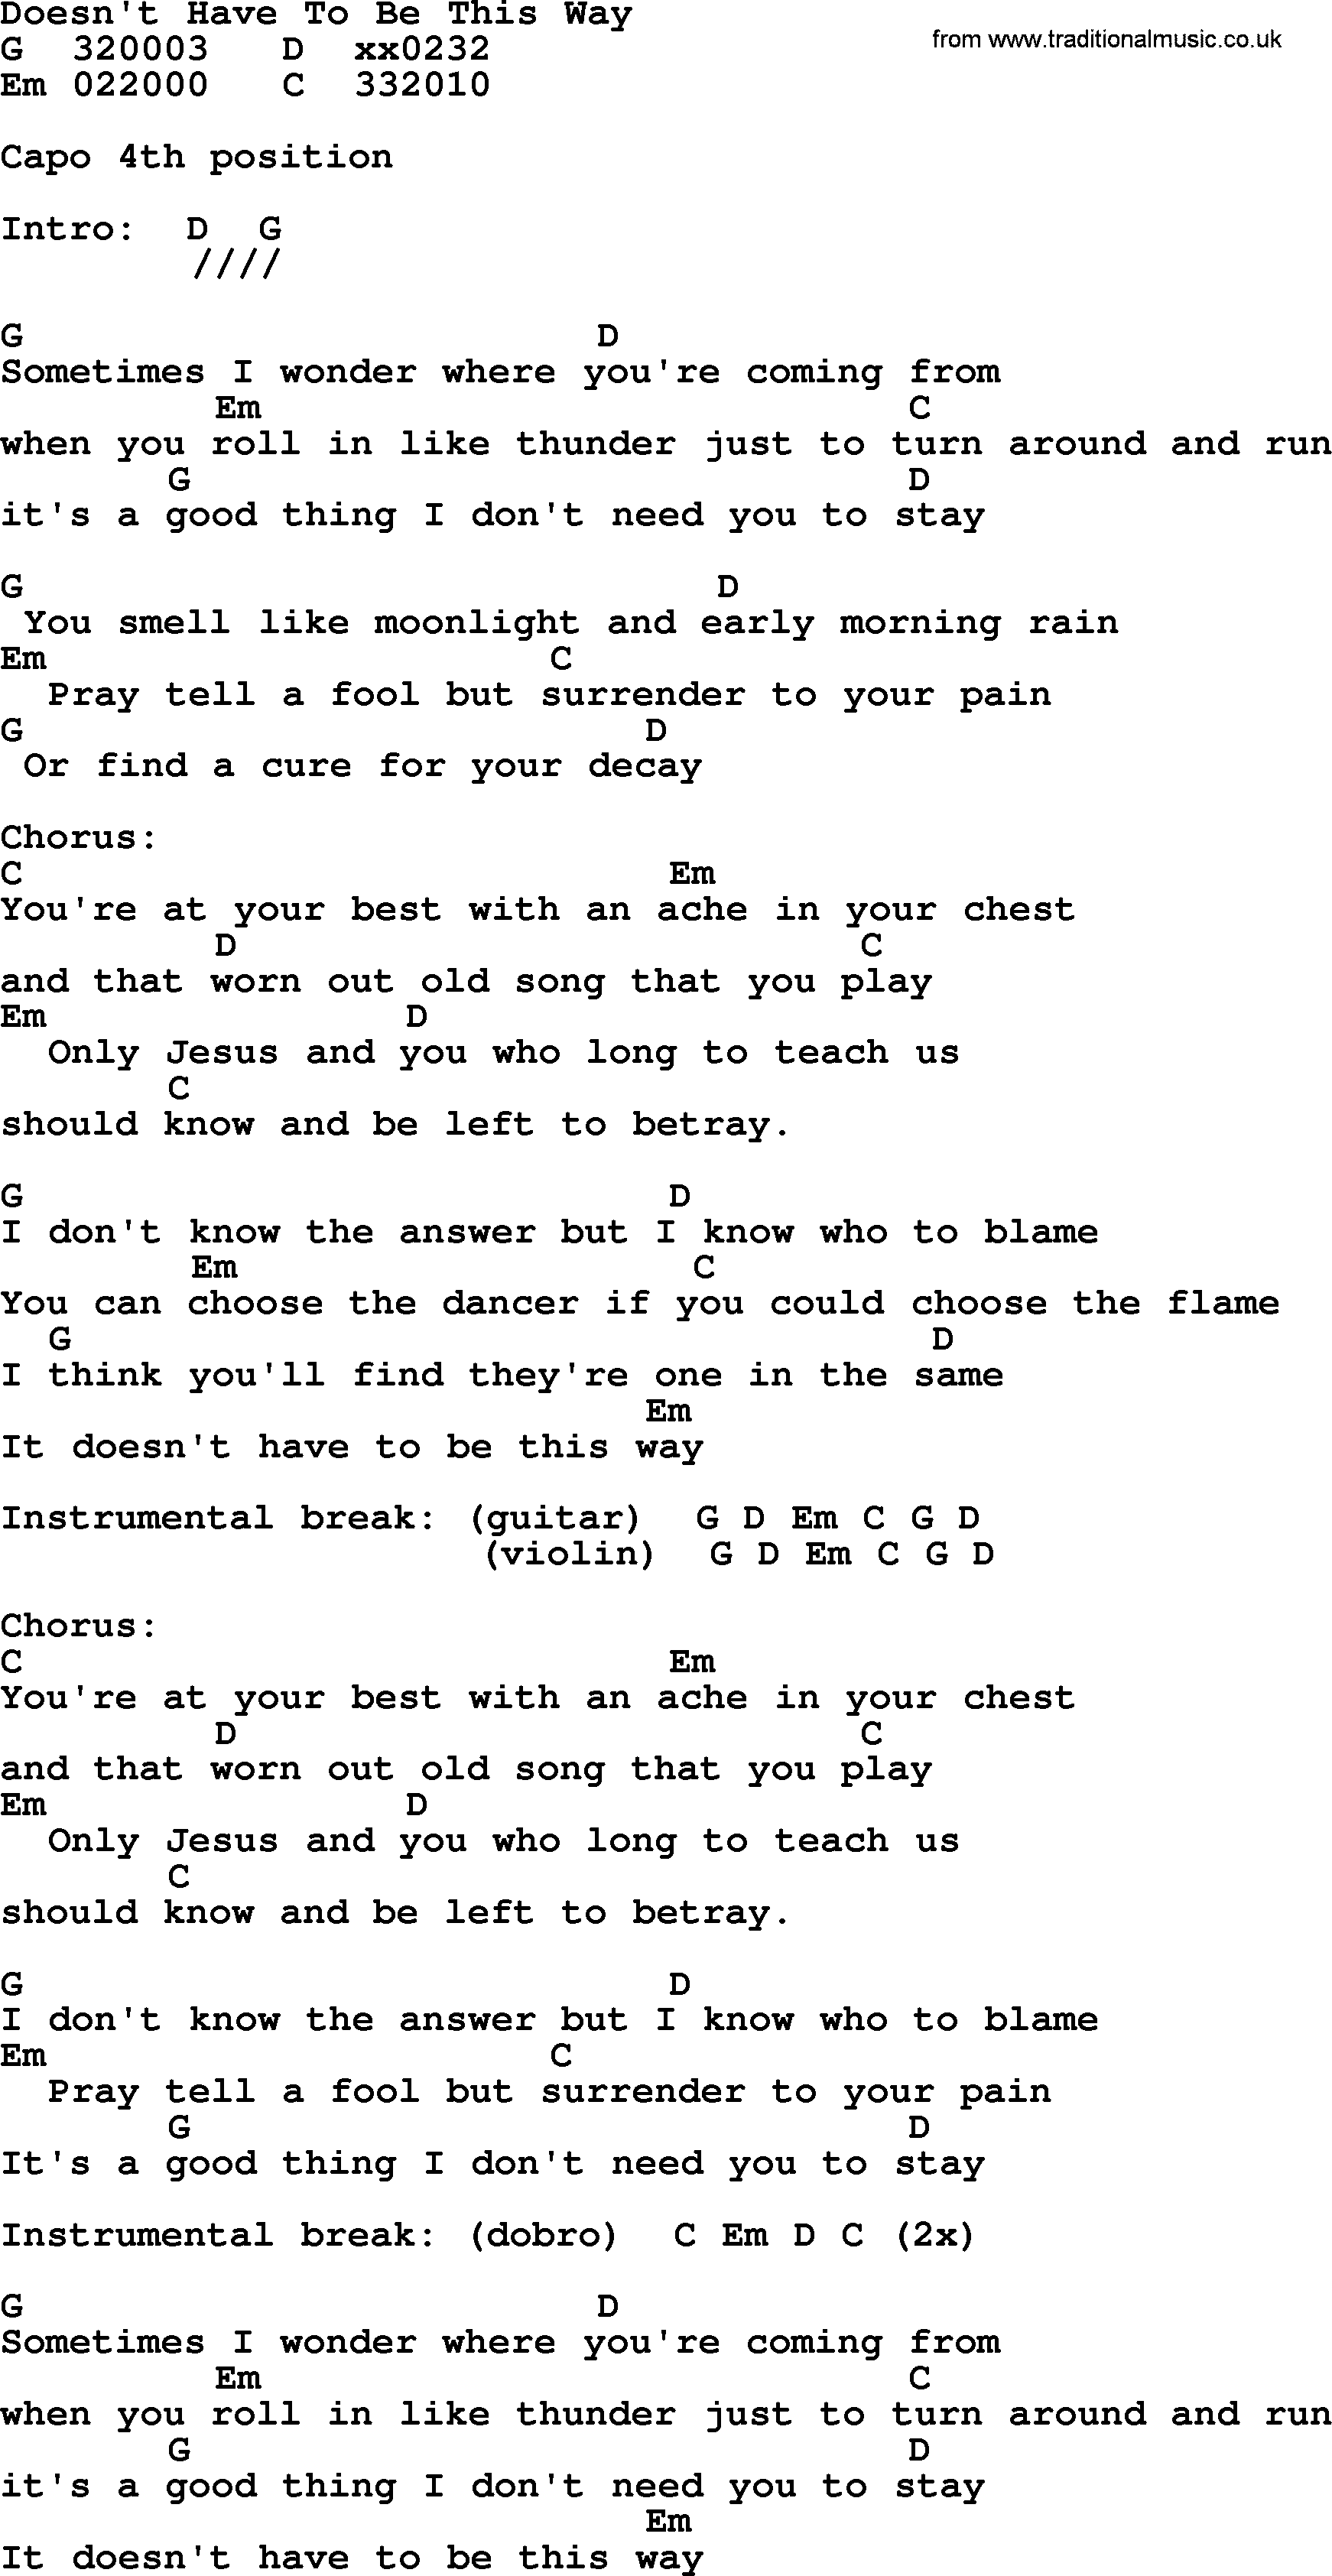 Bluegrass song: Doesn't Have To Be This Way, lyrics and chords